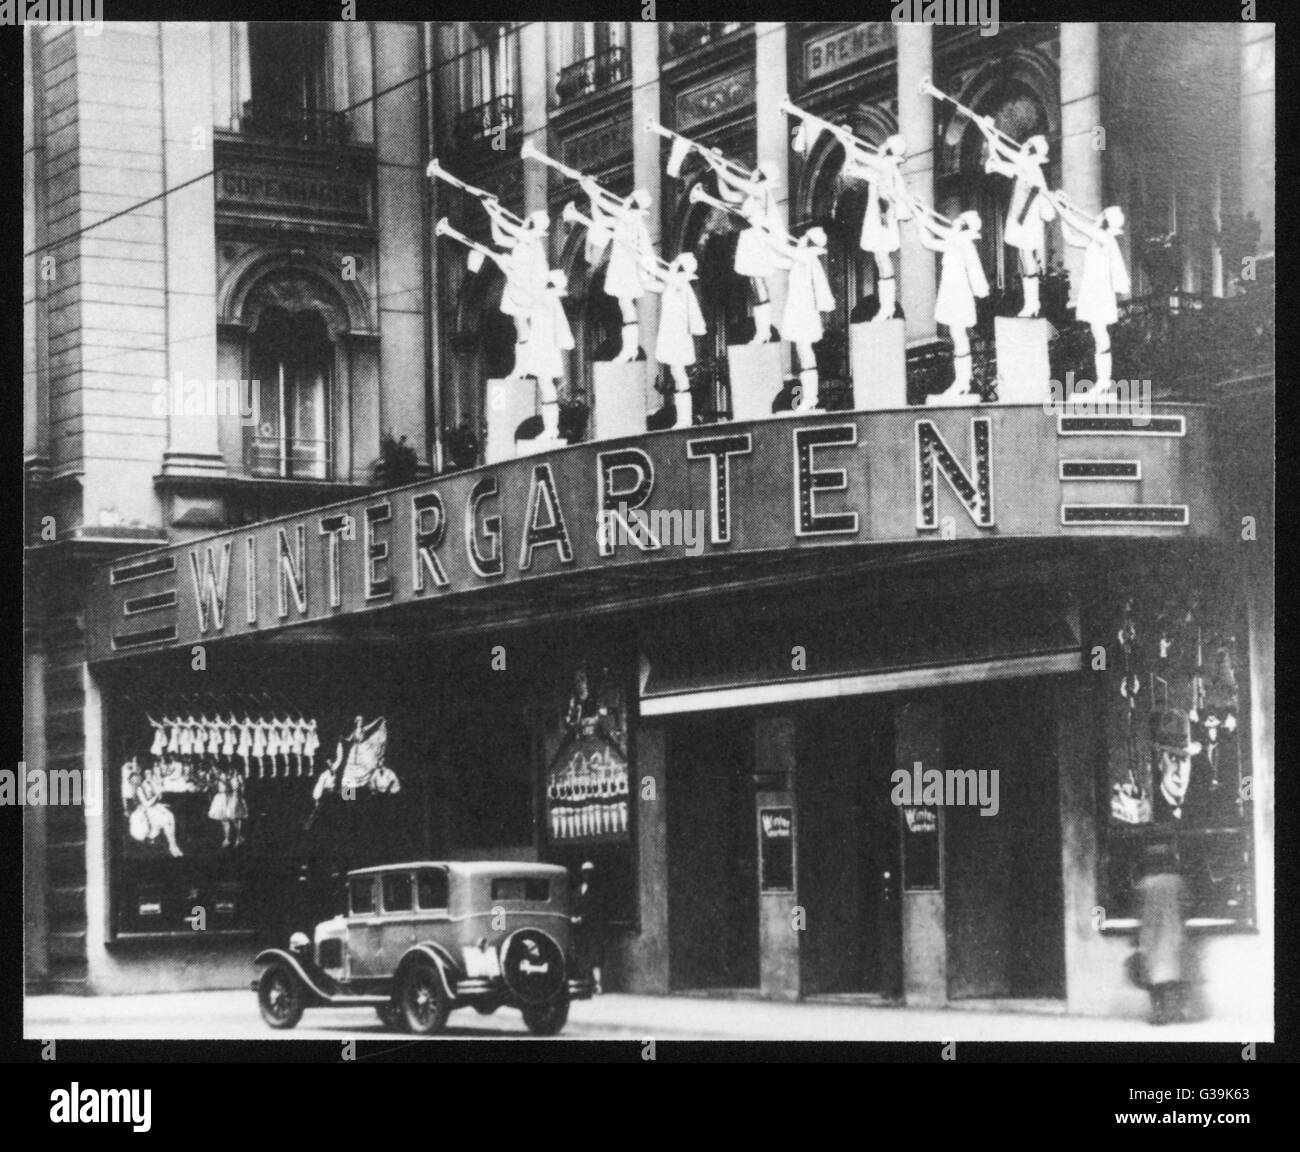 The entrance to the  Wintergarten theatre in  Berlin        Date: early 1930's Stock Photo